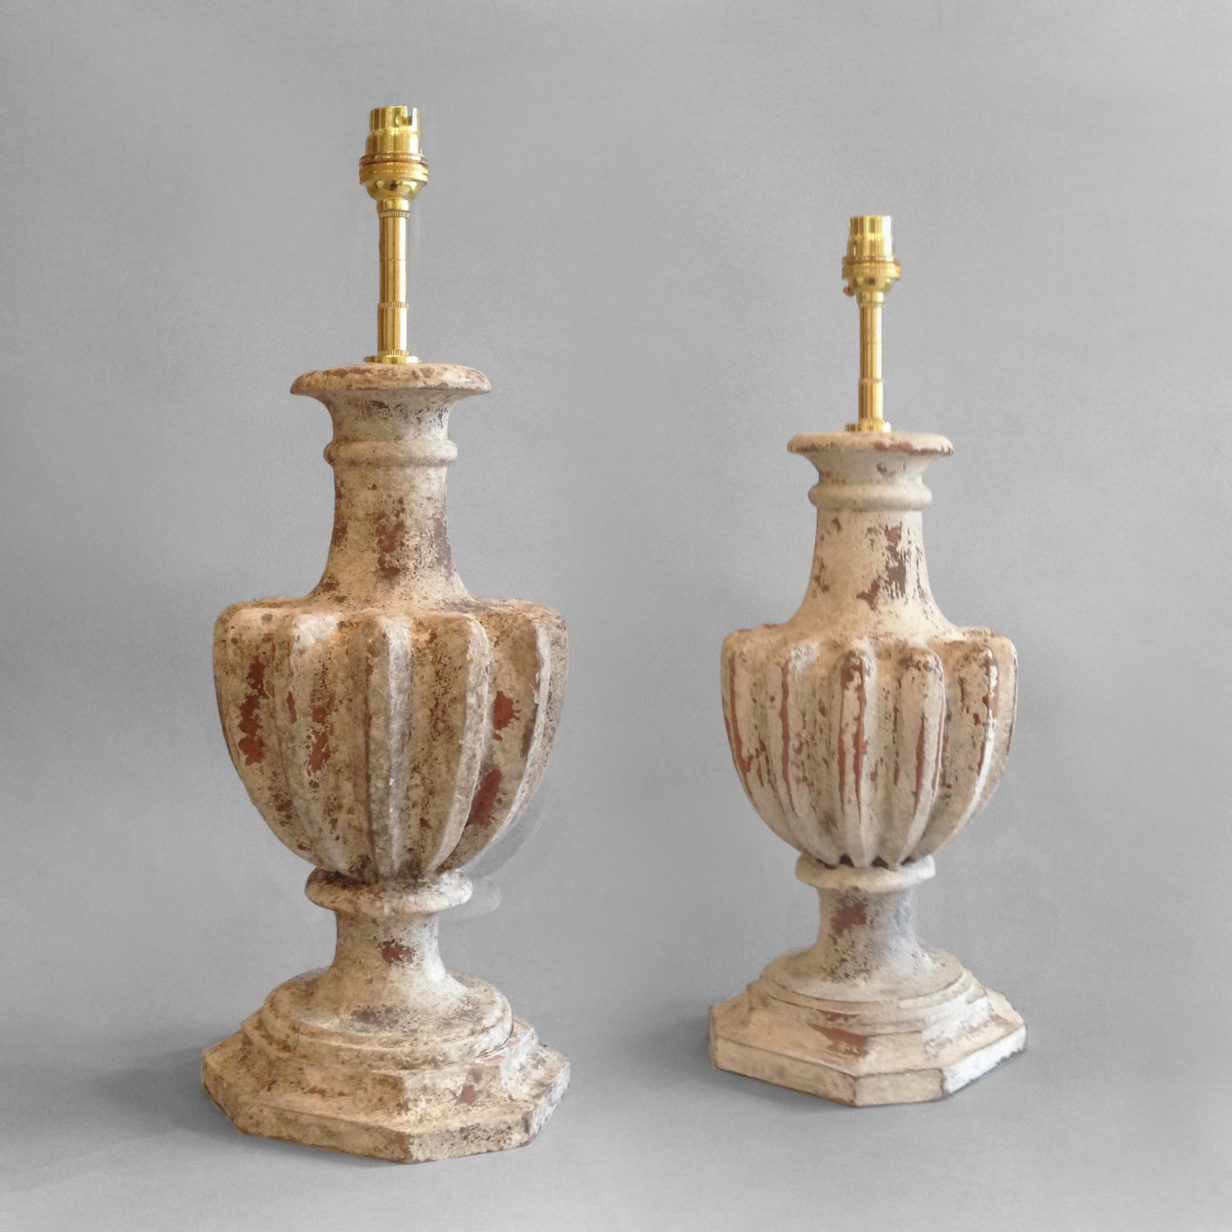 A pair of sully lamp bases